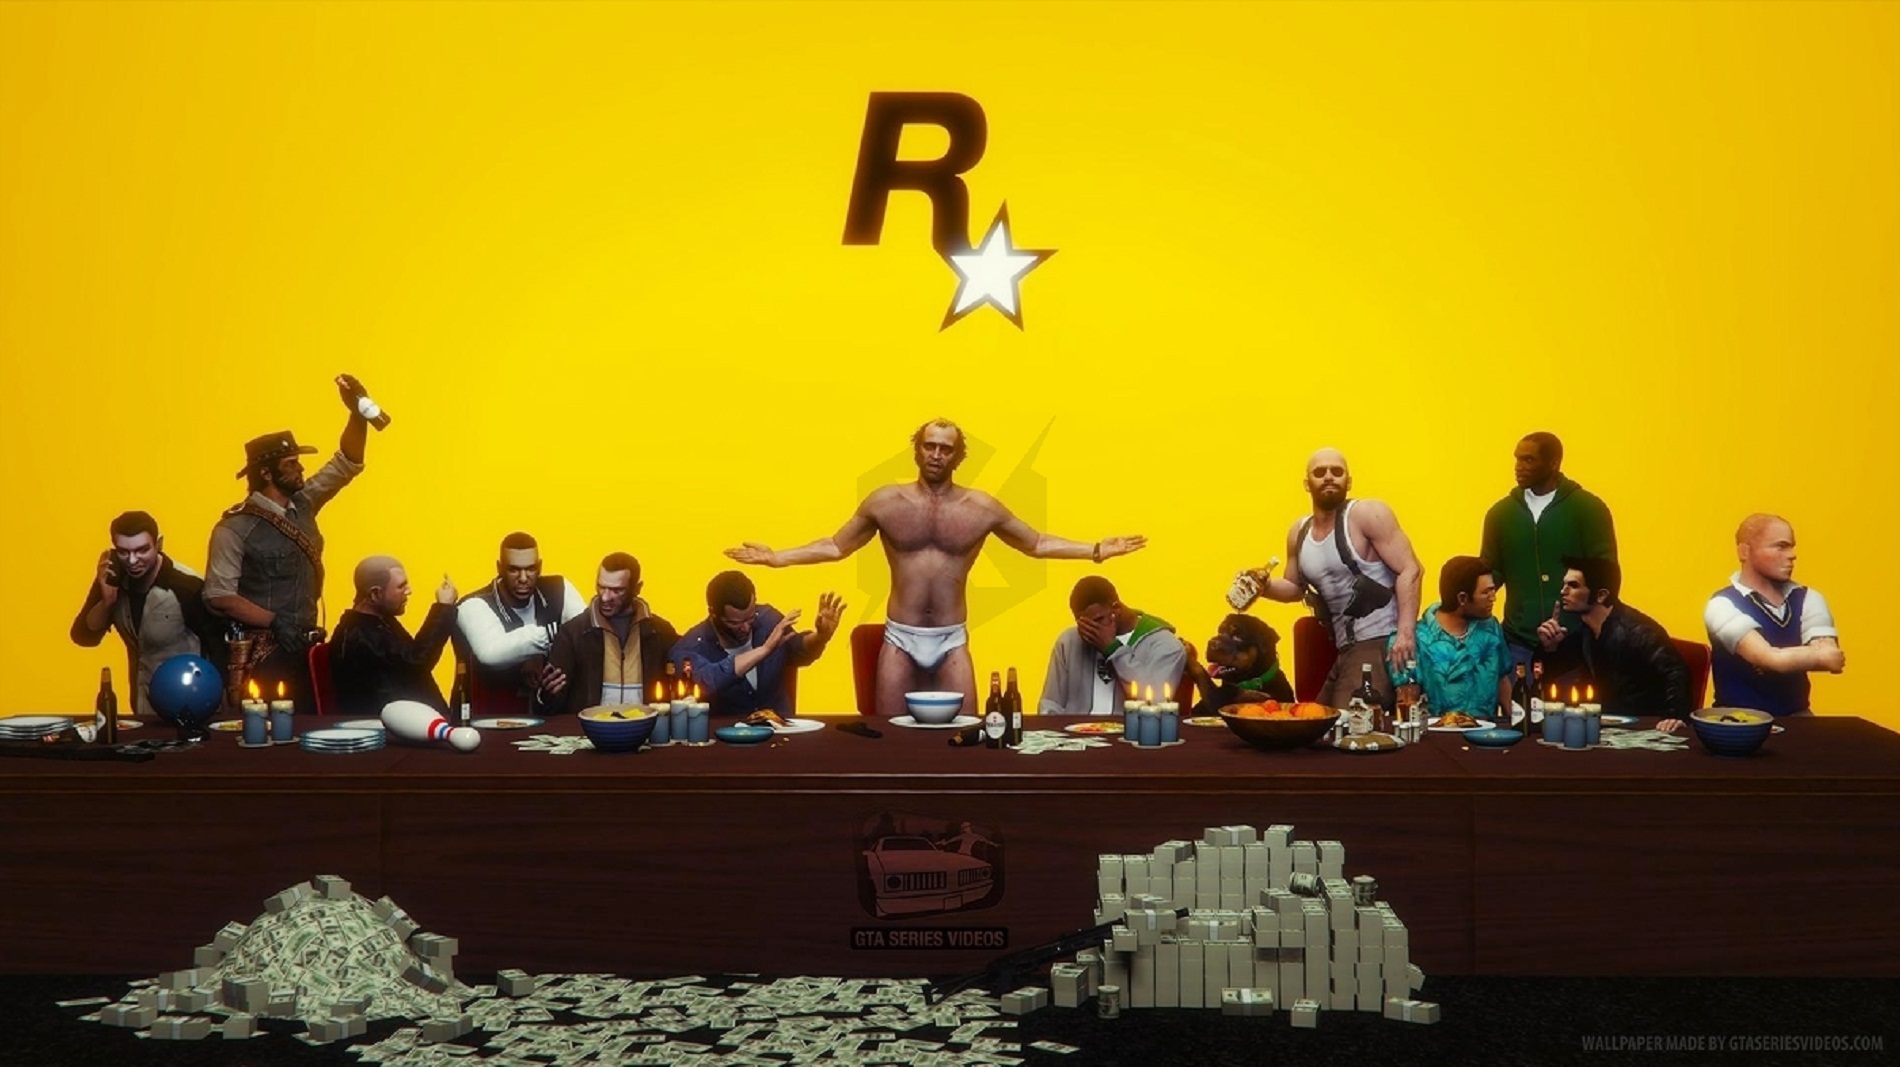 Rockstar Games Speaks Back On Tax Neglect Criticism, That UK Tax Relief Is A Result Of Their Meaningful Impact